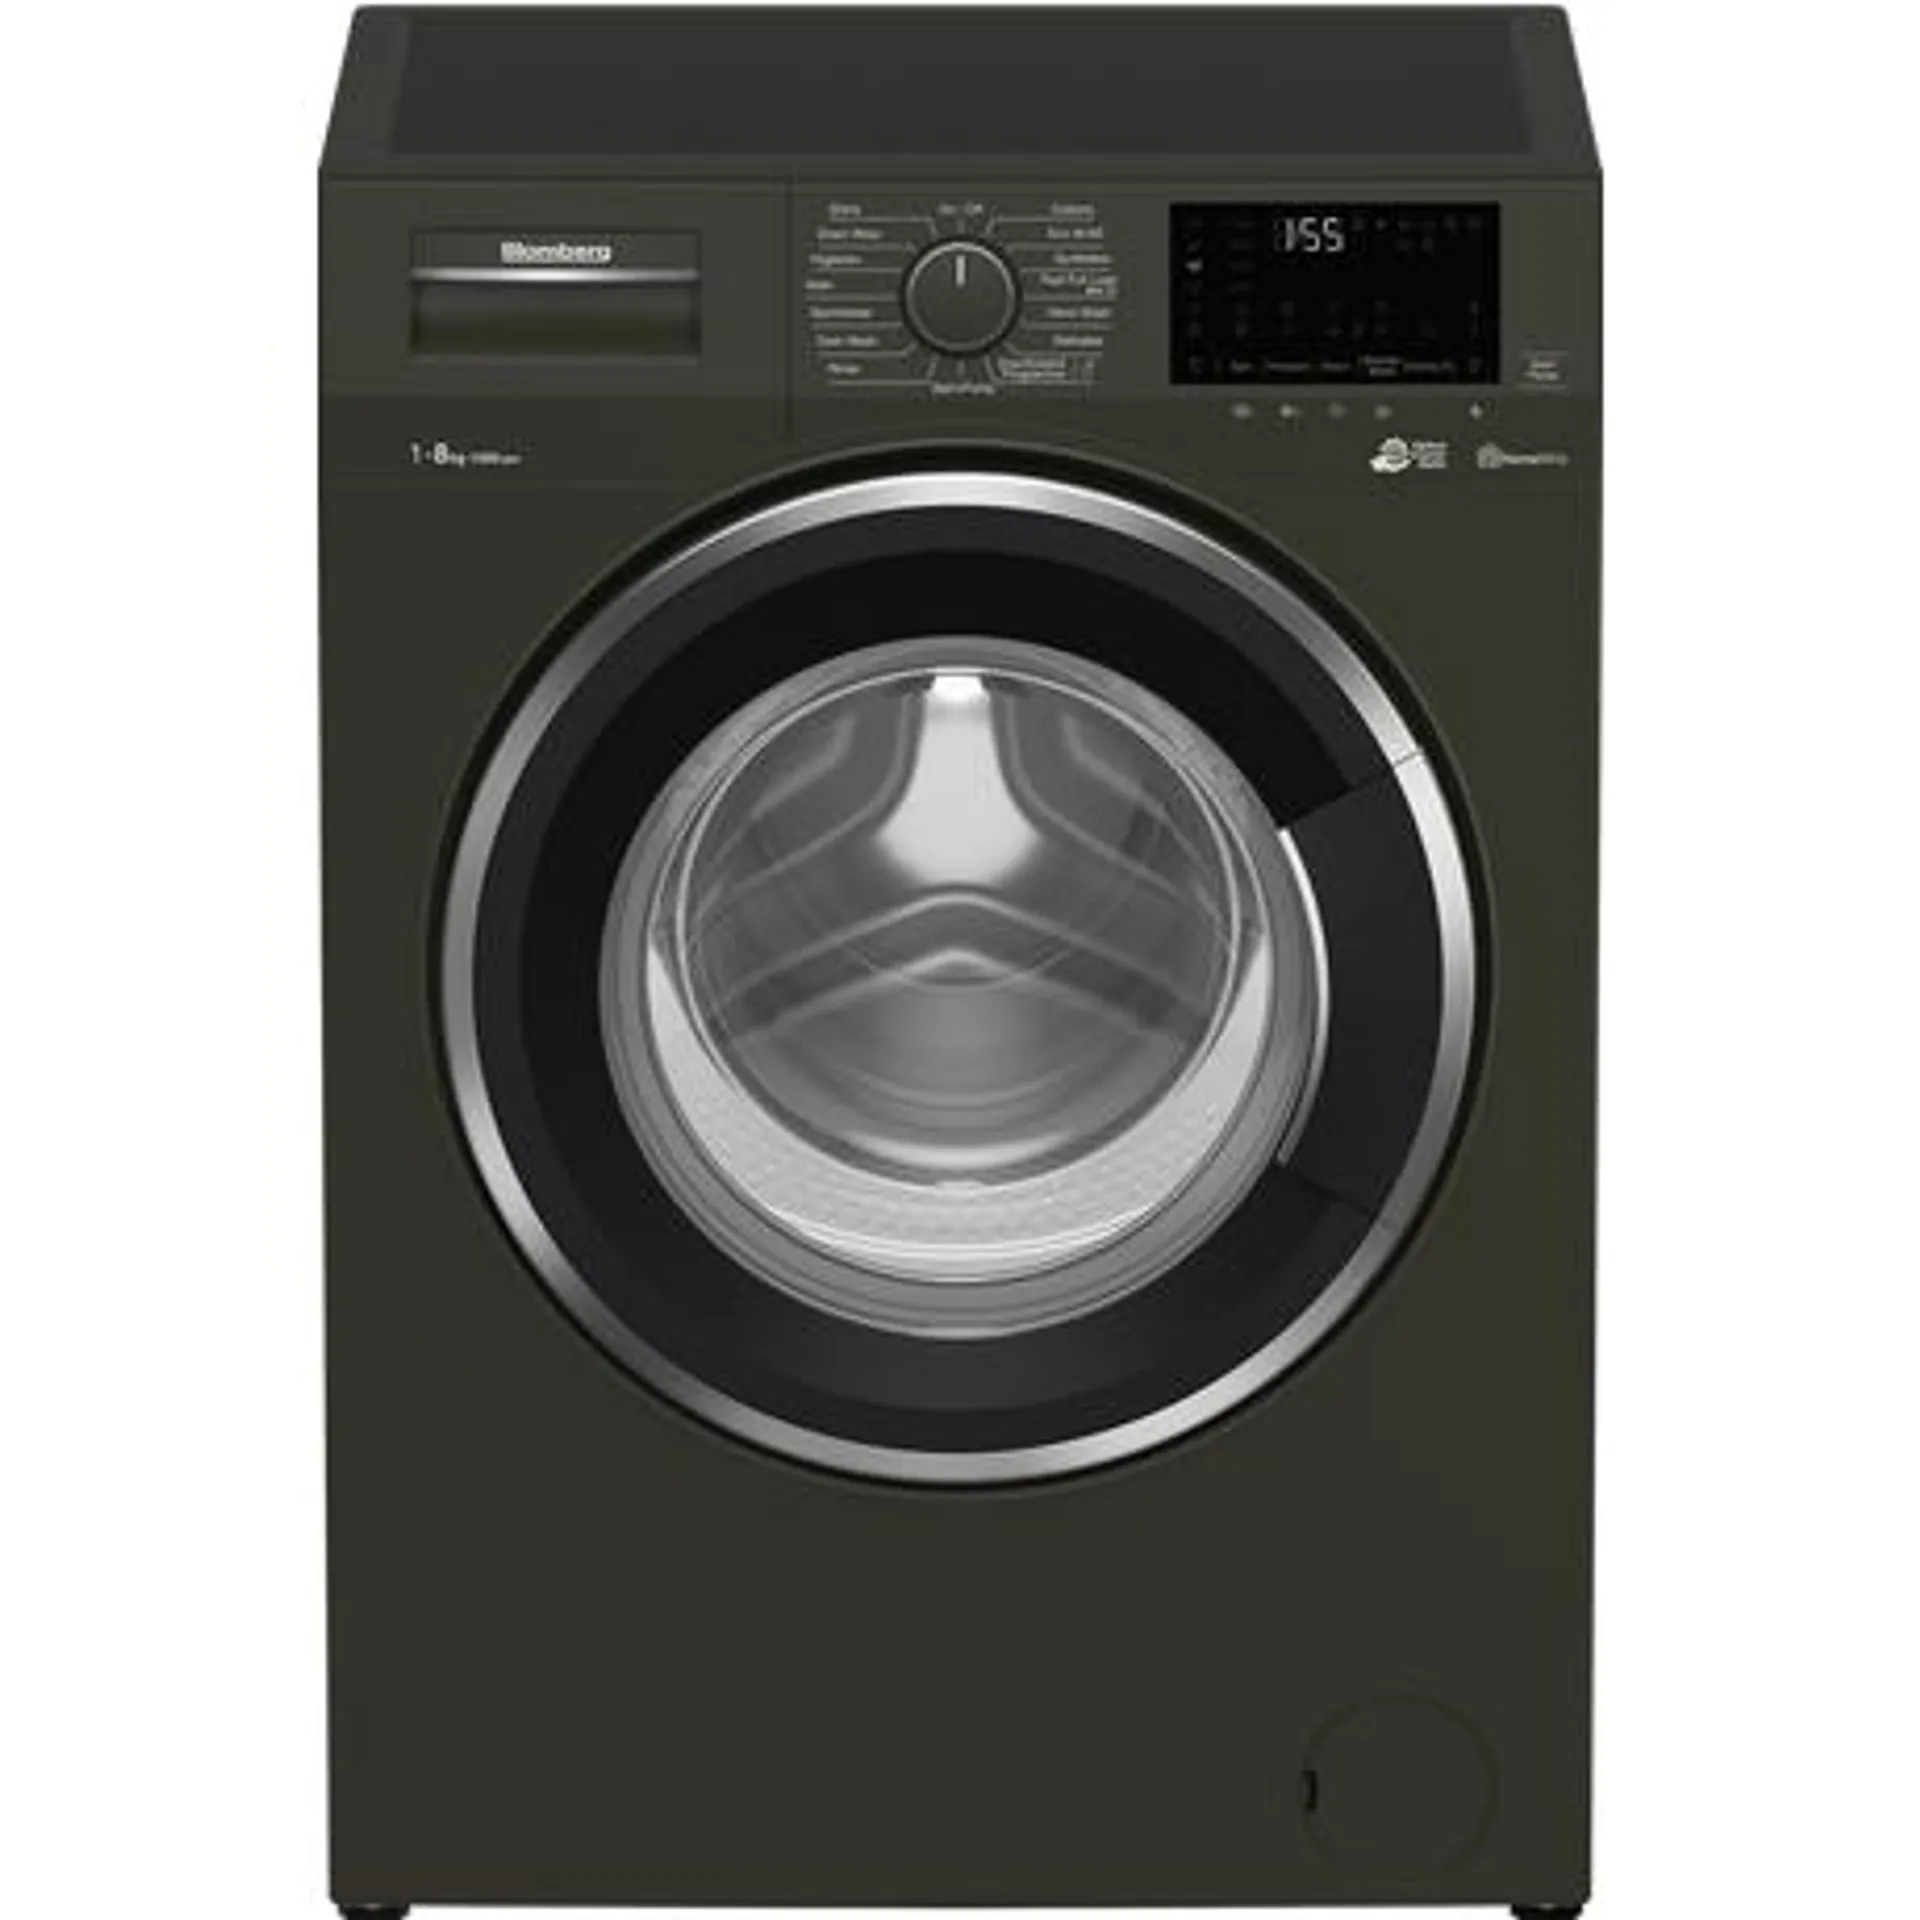 Blomberg LWF184420G 8kg 1400 Spin Washing Machine with Fast Full Load - Graphite